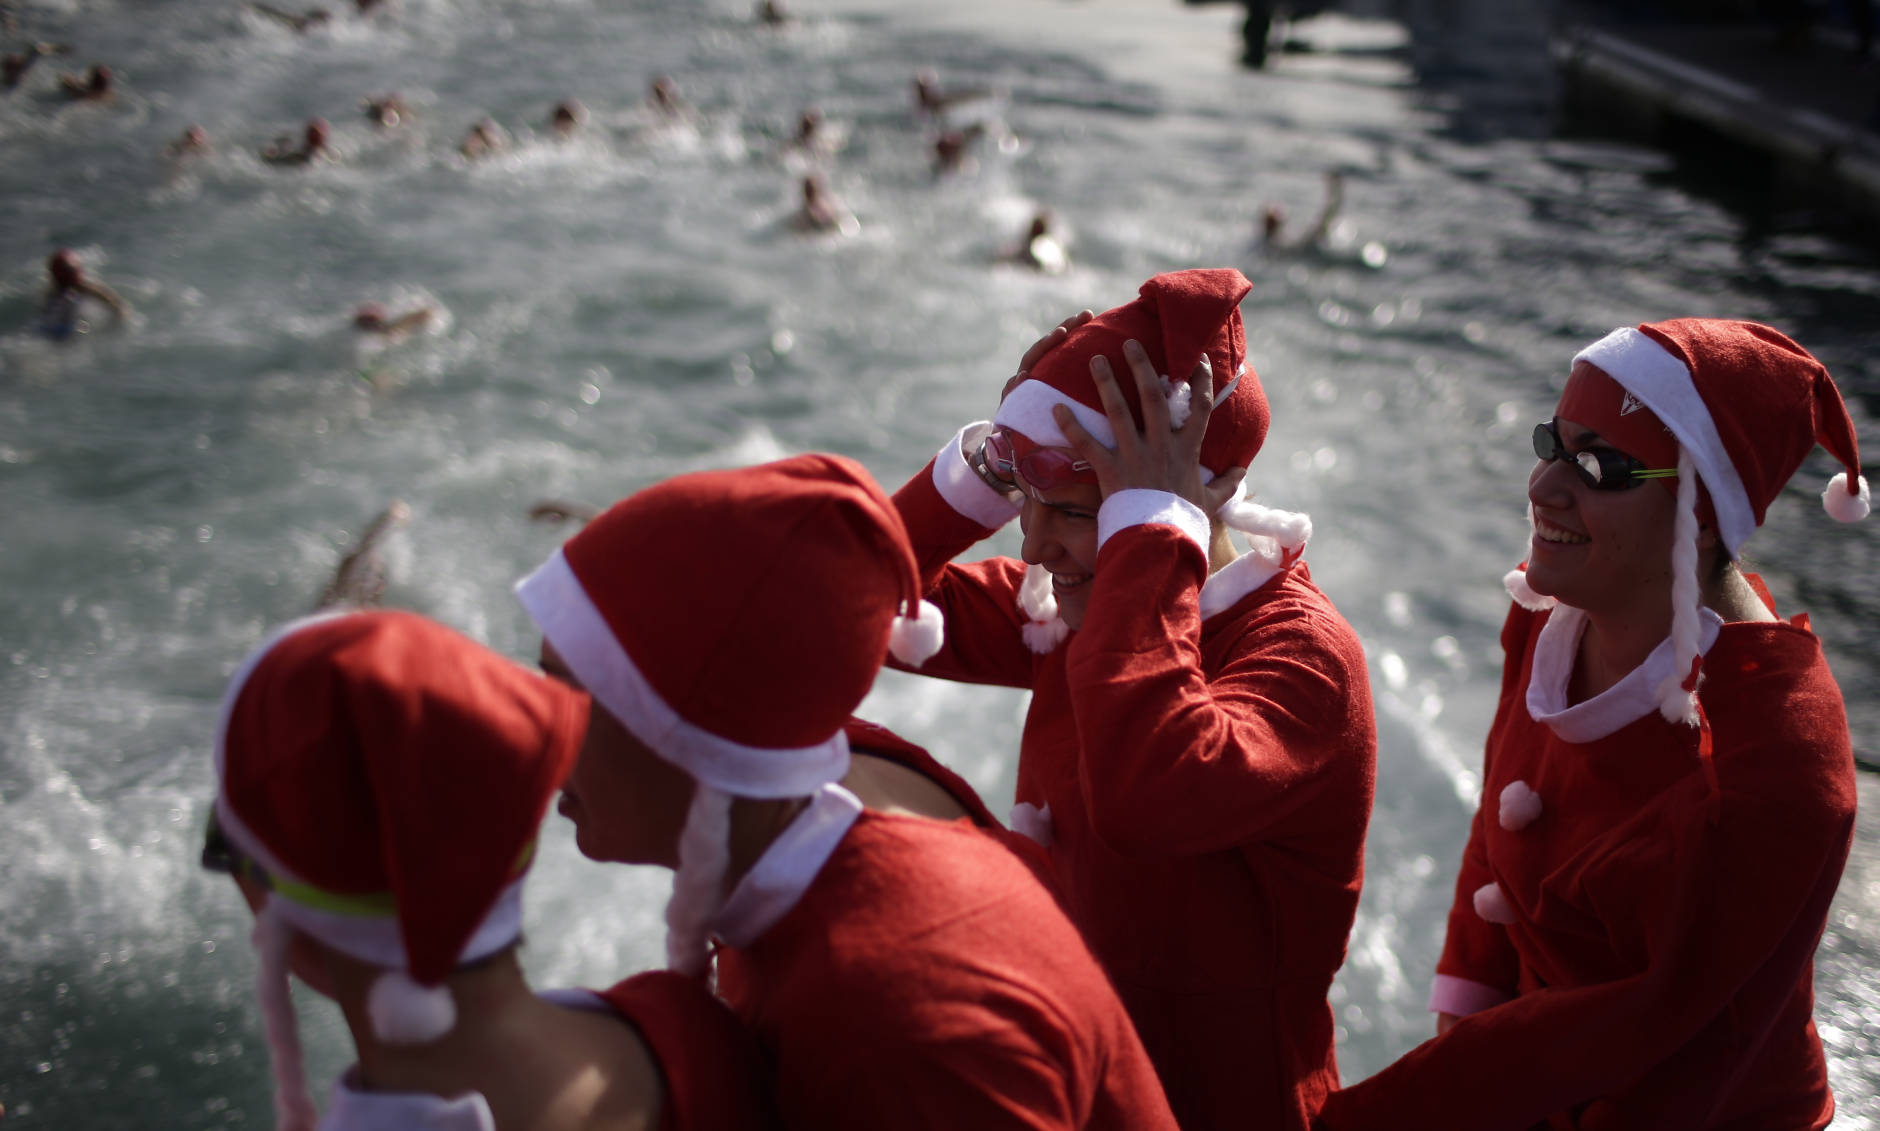 Women dressed as Santa Claus prepare to jump into the Mediterranean sea as they take part in the Copa Nadal in the Spanish port of Barcelona, Sunday, Dec. 25, 2016. The Copa Nadal (Christmas Cup) is a traditional swimming competition that takes place in Barcelona every December 25th, where participants swim 200 meters in the open sea in the port of Barcelona. (AP Photo/Manu Fernandez)